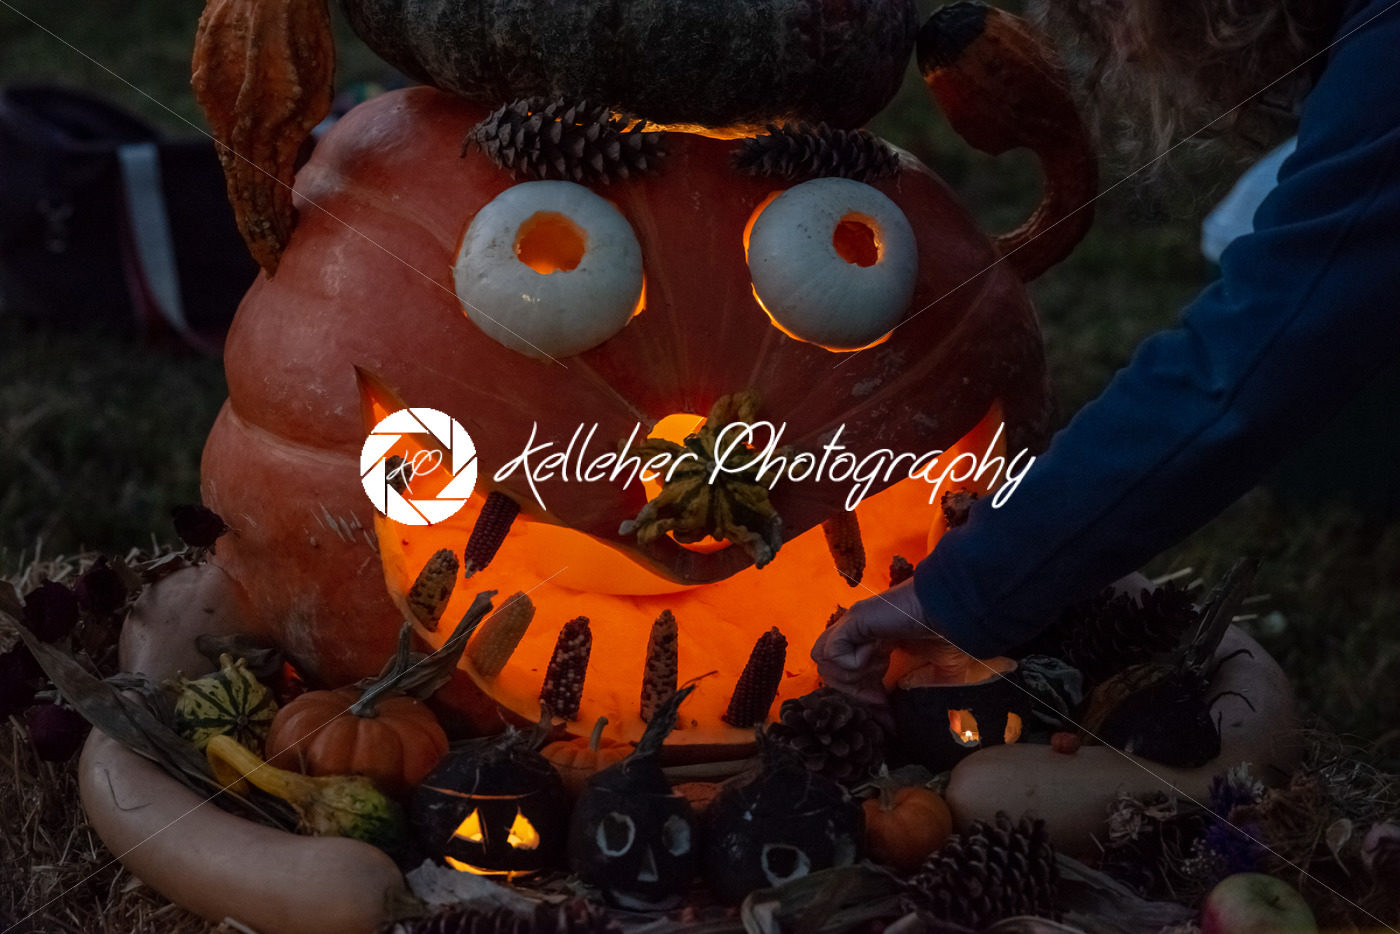 CHADDS FORD, PA – OCTOBER 18: The Great Pumpkin Carve carving contest on October 18, 2018 - Kelleher Photography Store